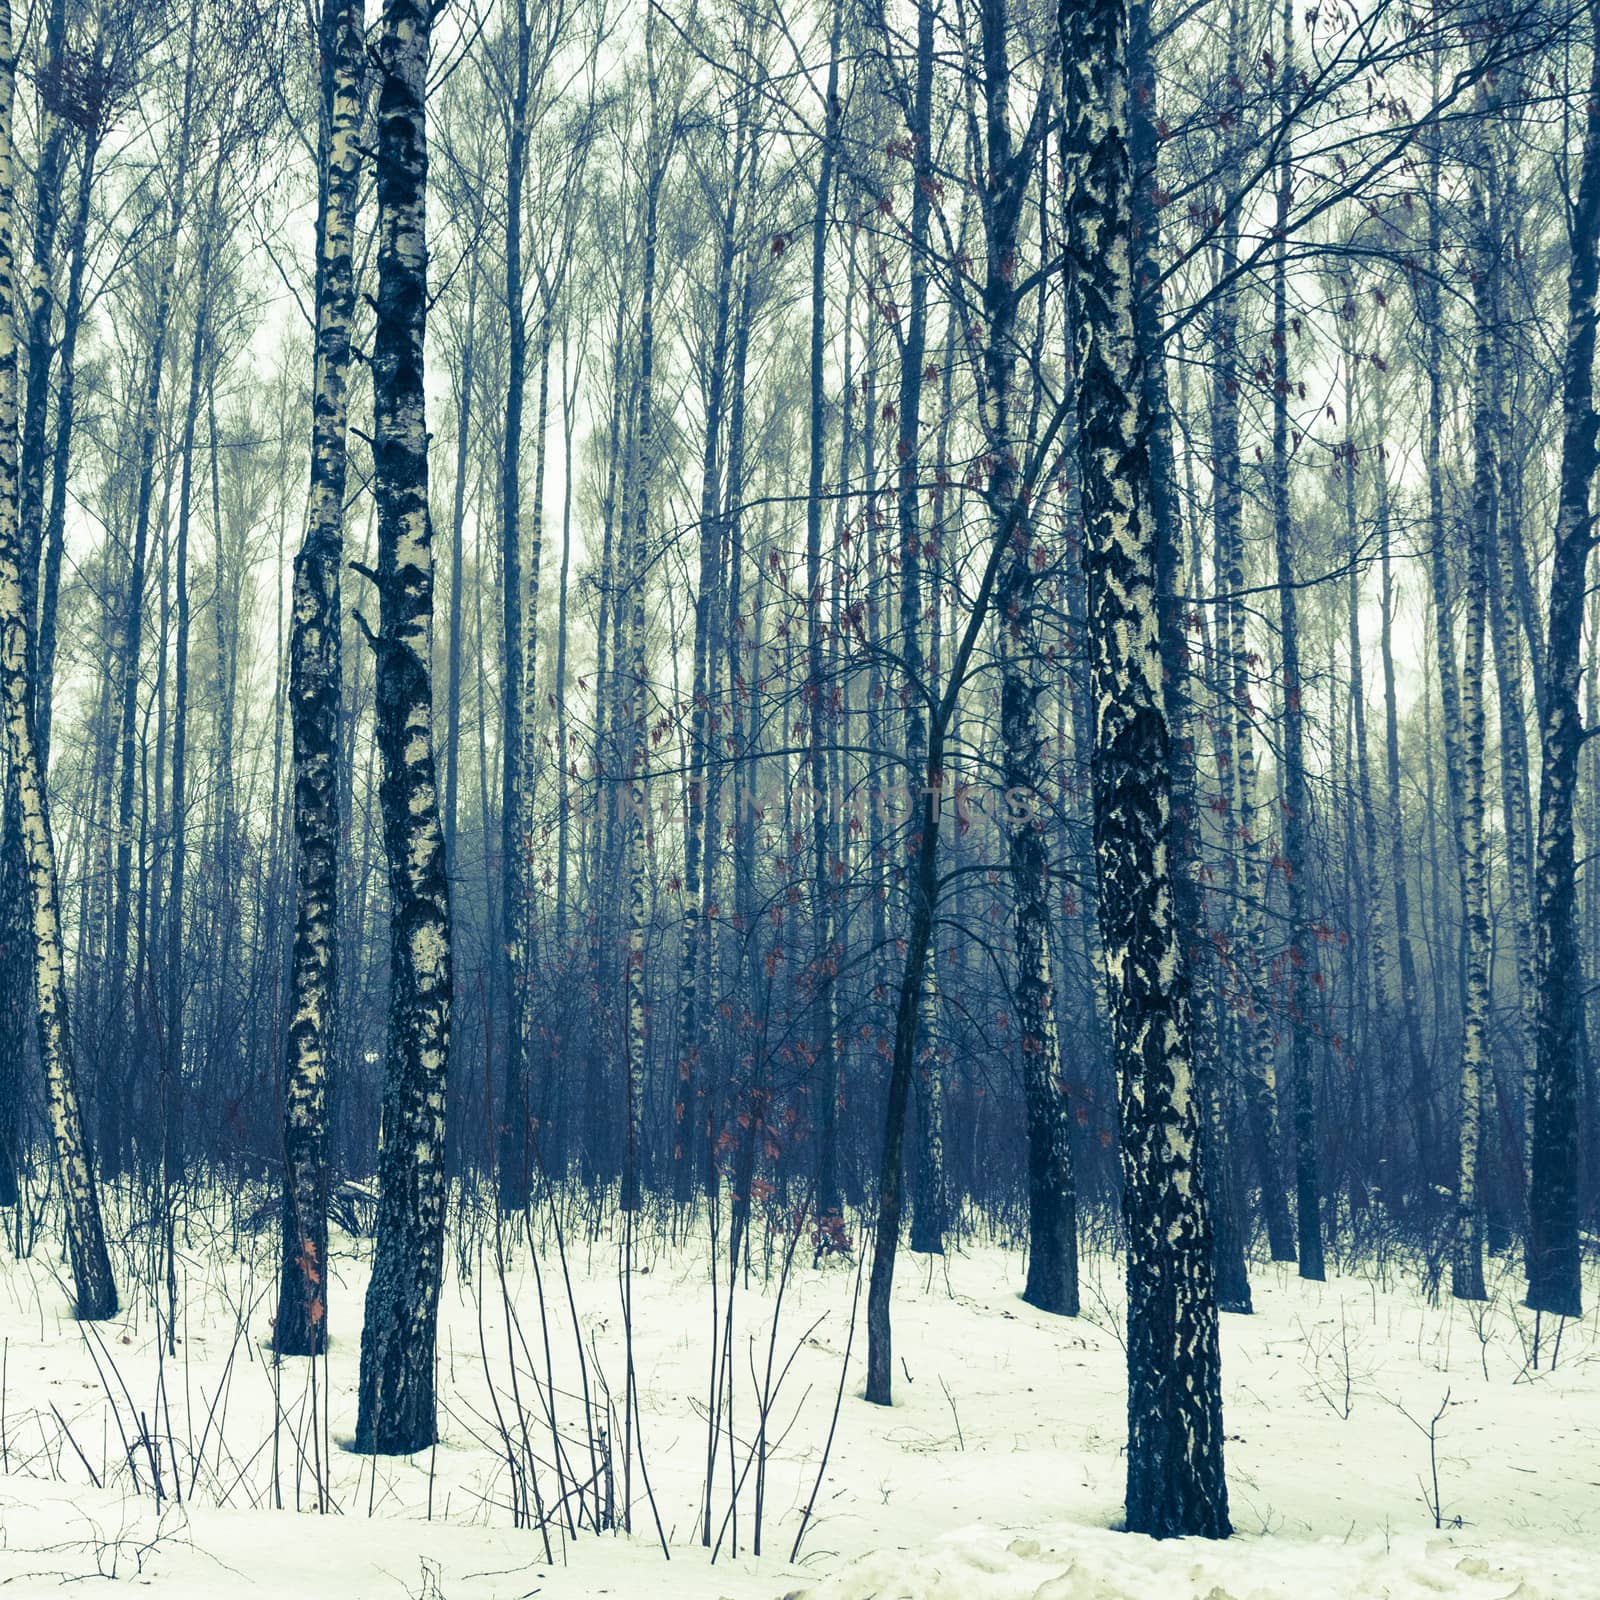 Birch forest in winter covered by snow in blue colors